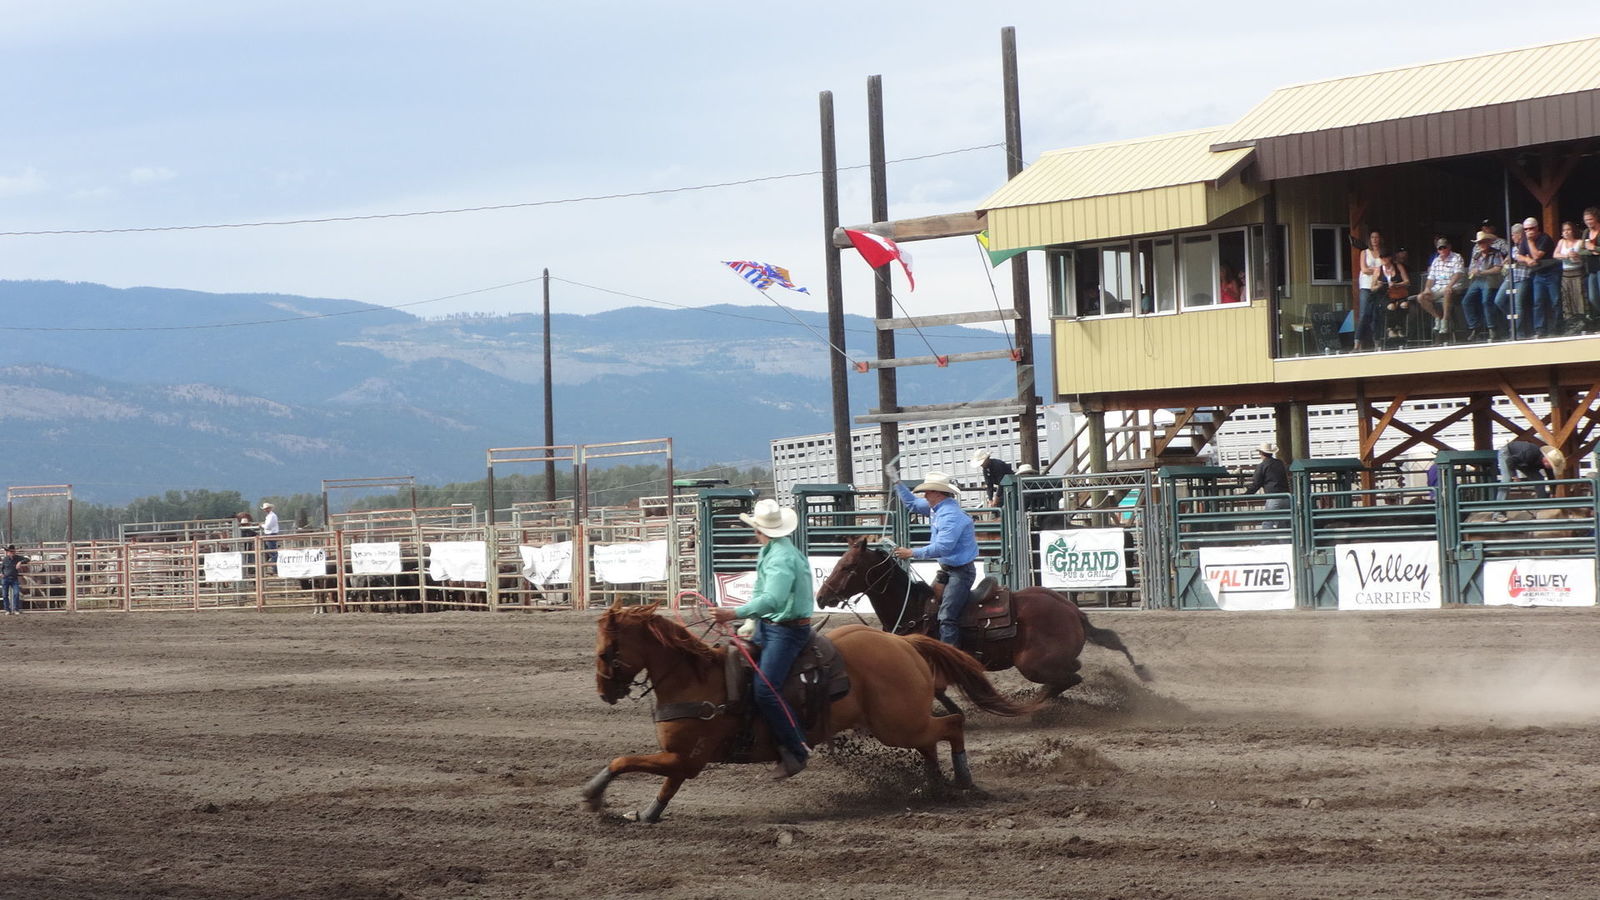 Team Roping event